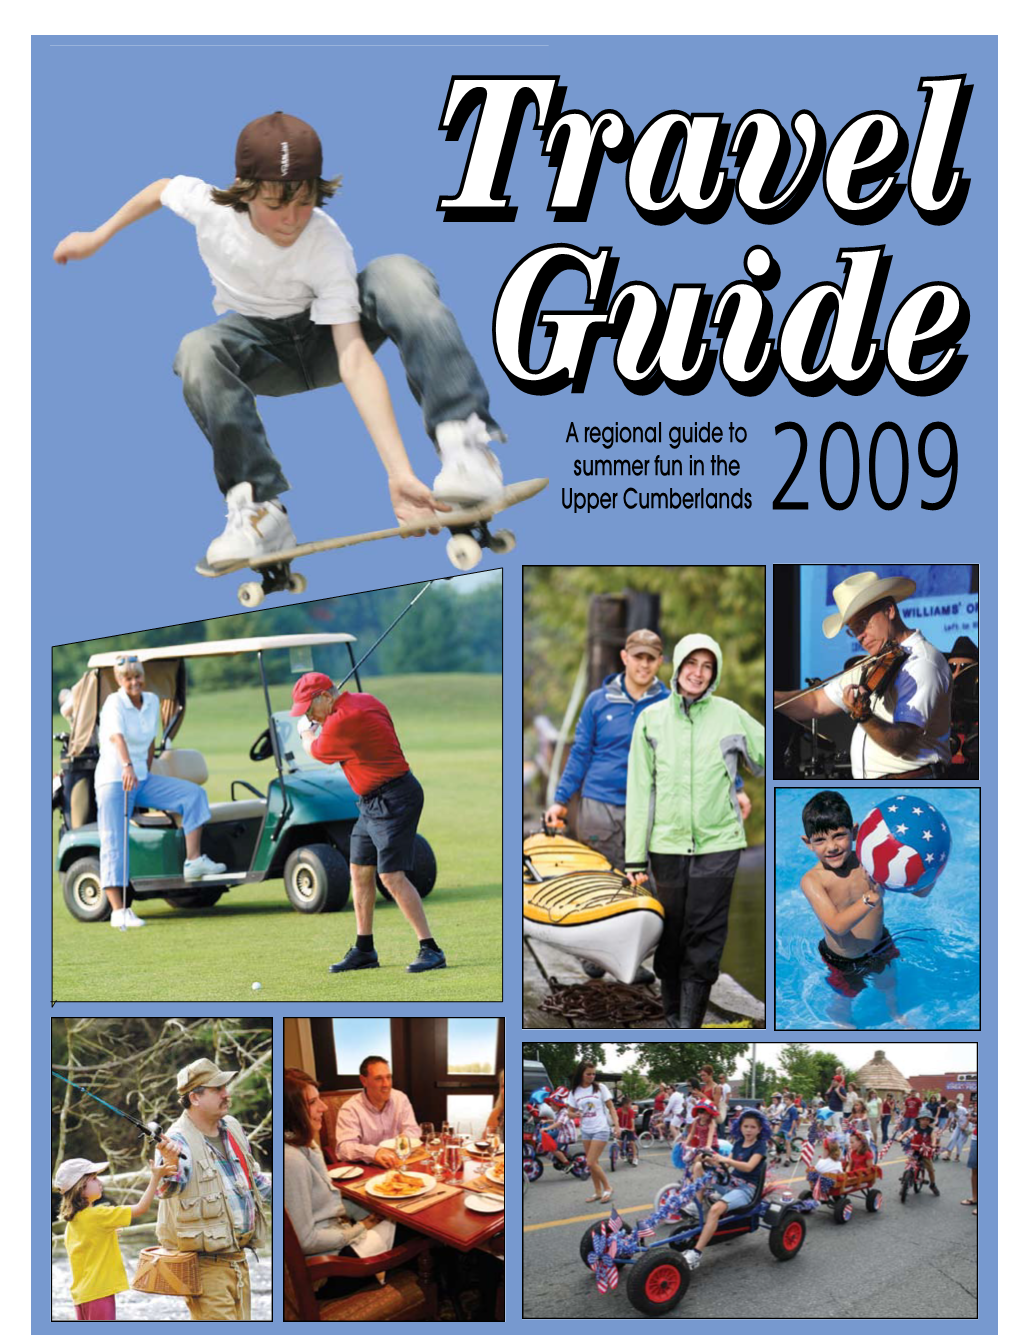 A Regional Guide to Summer Fun in the Upper Cumberlands 2009 2 TRAVEL GUIDE 2009 Crossville Chronicle